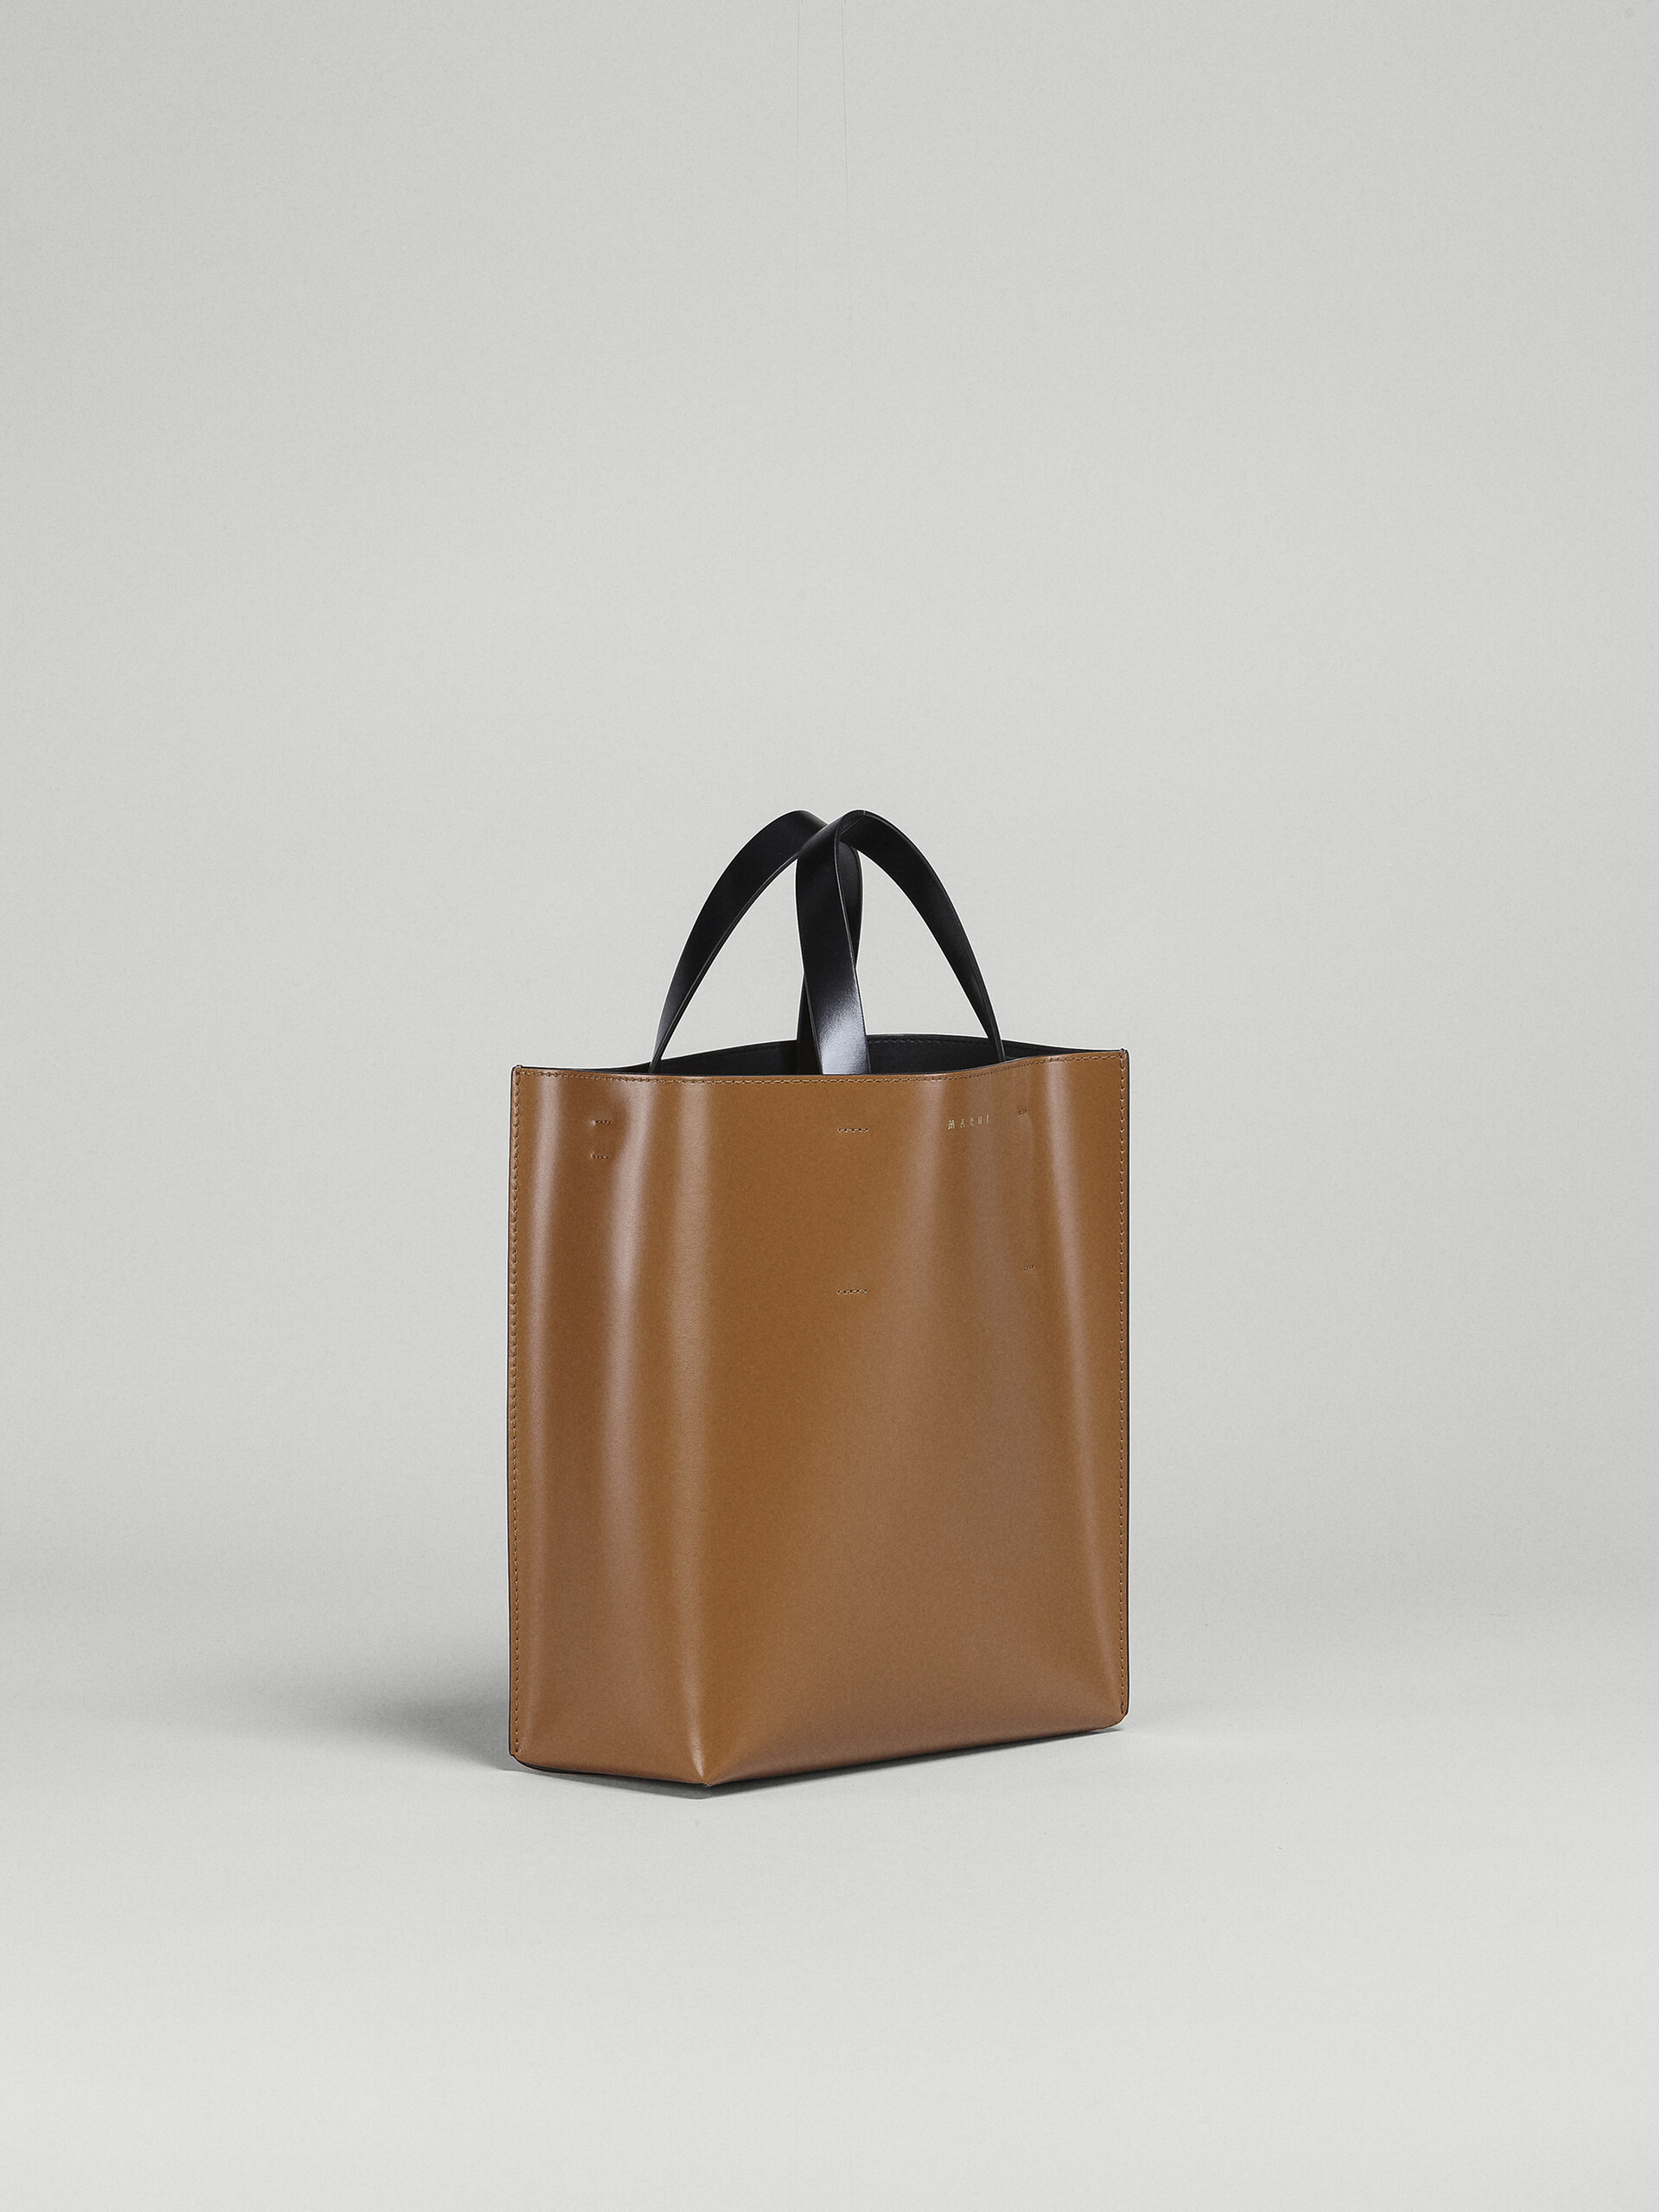 Women's leather tote bags and shopping bags